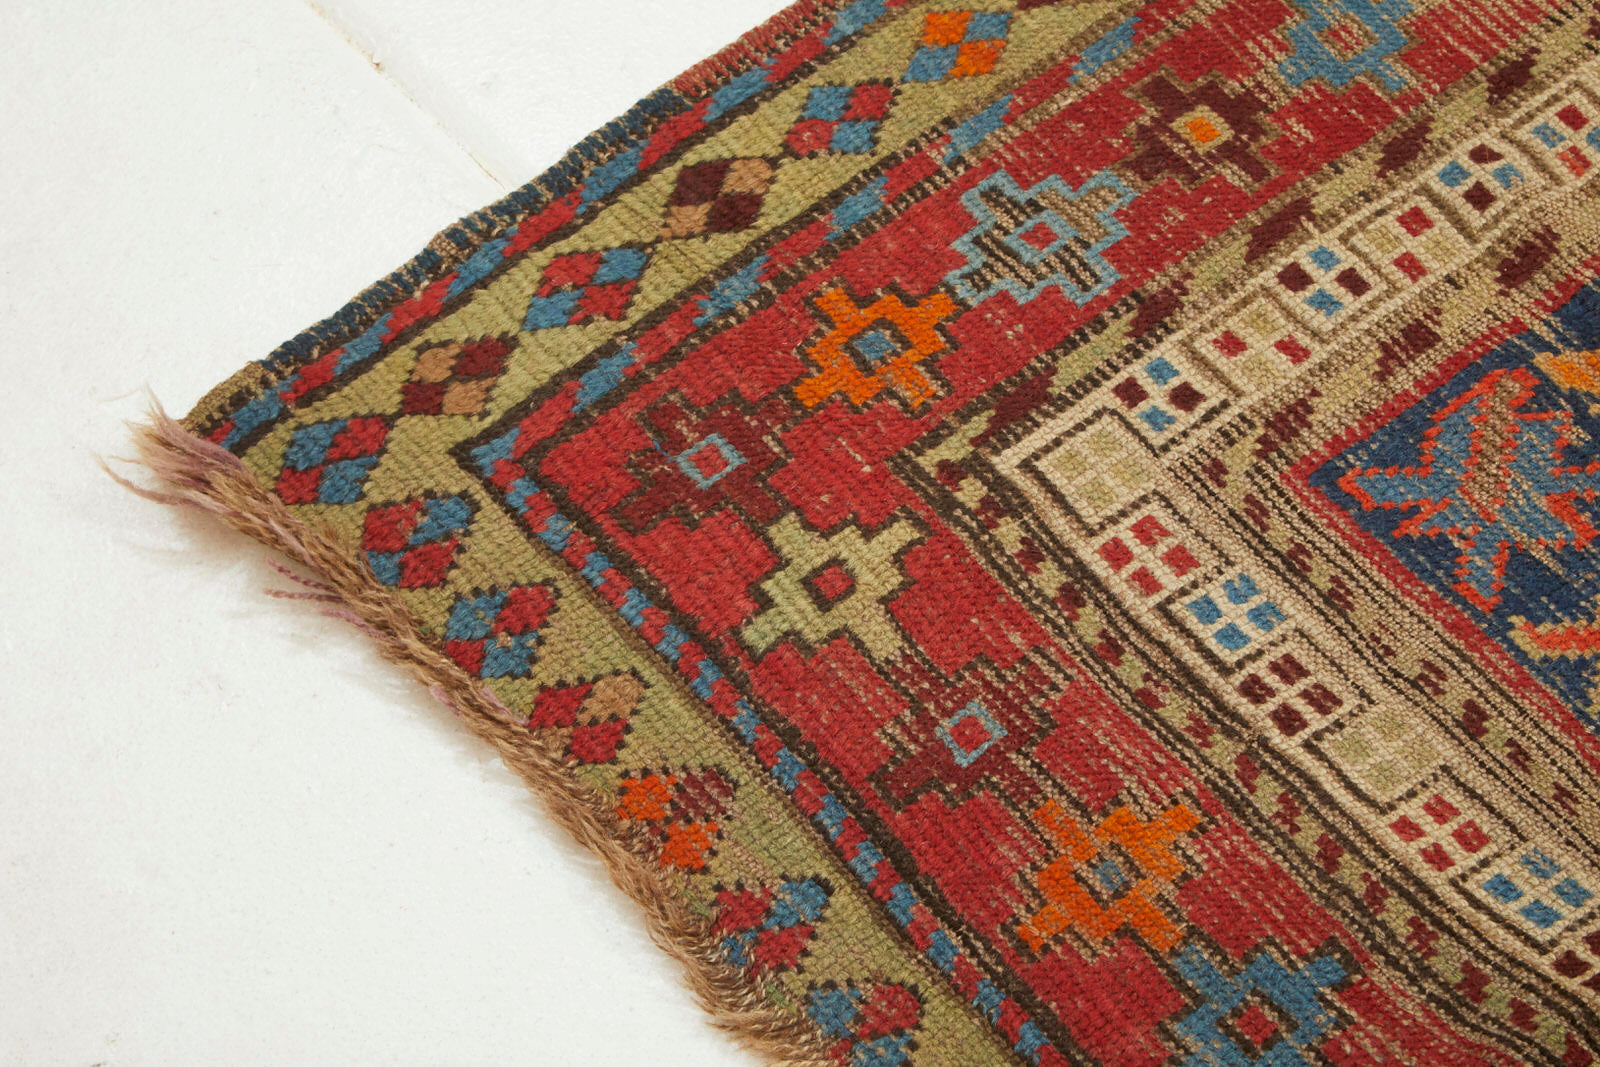 Kazak Persian Caucasian Rug with red, brown, blue and orange colors Available from King Kennedy Rugs Los Angeles 